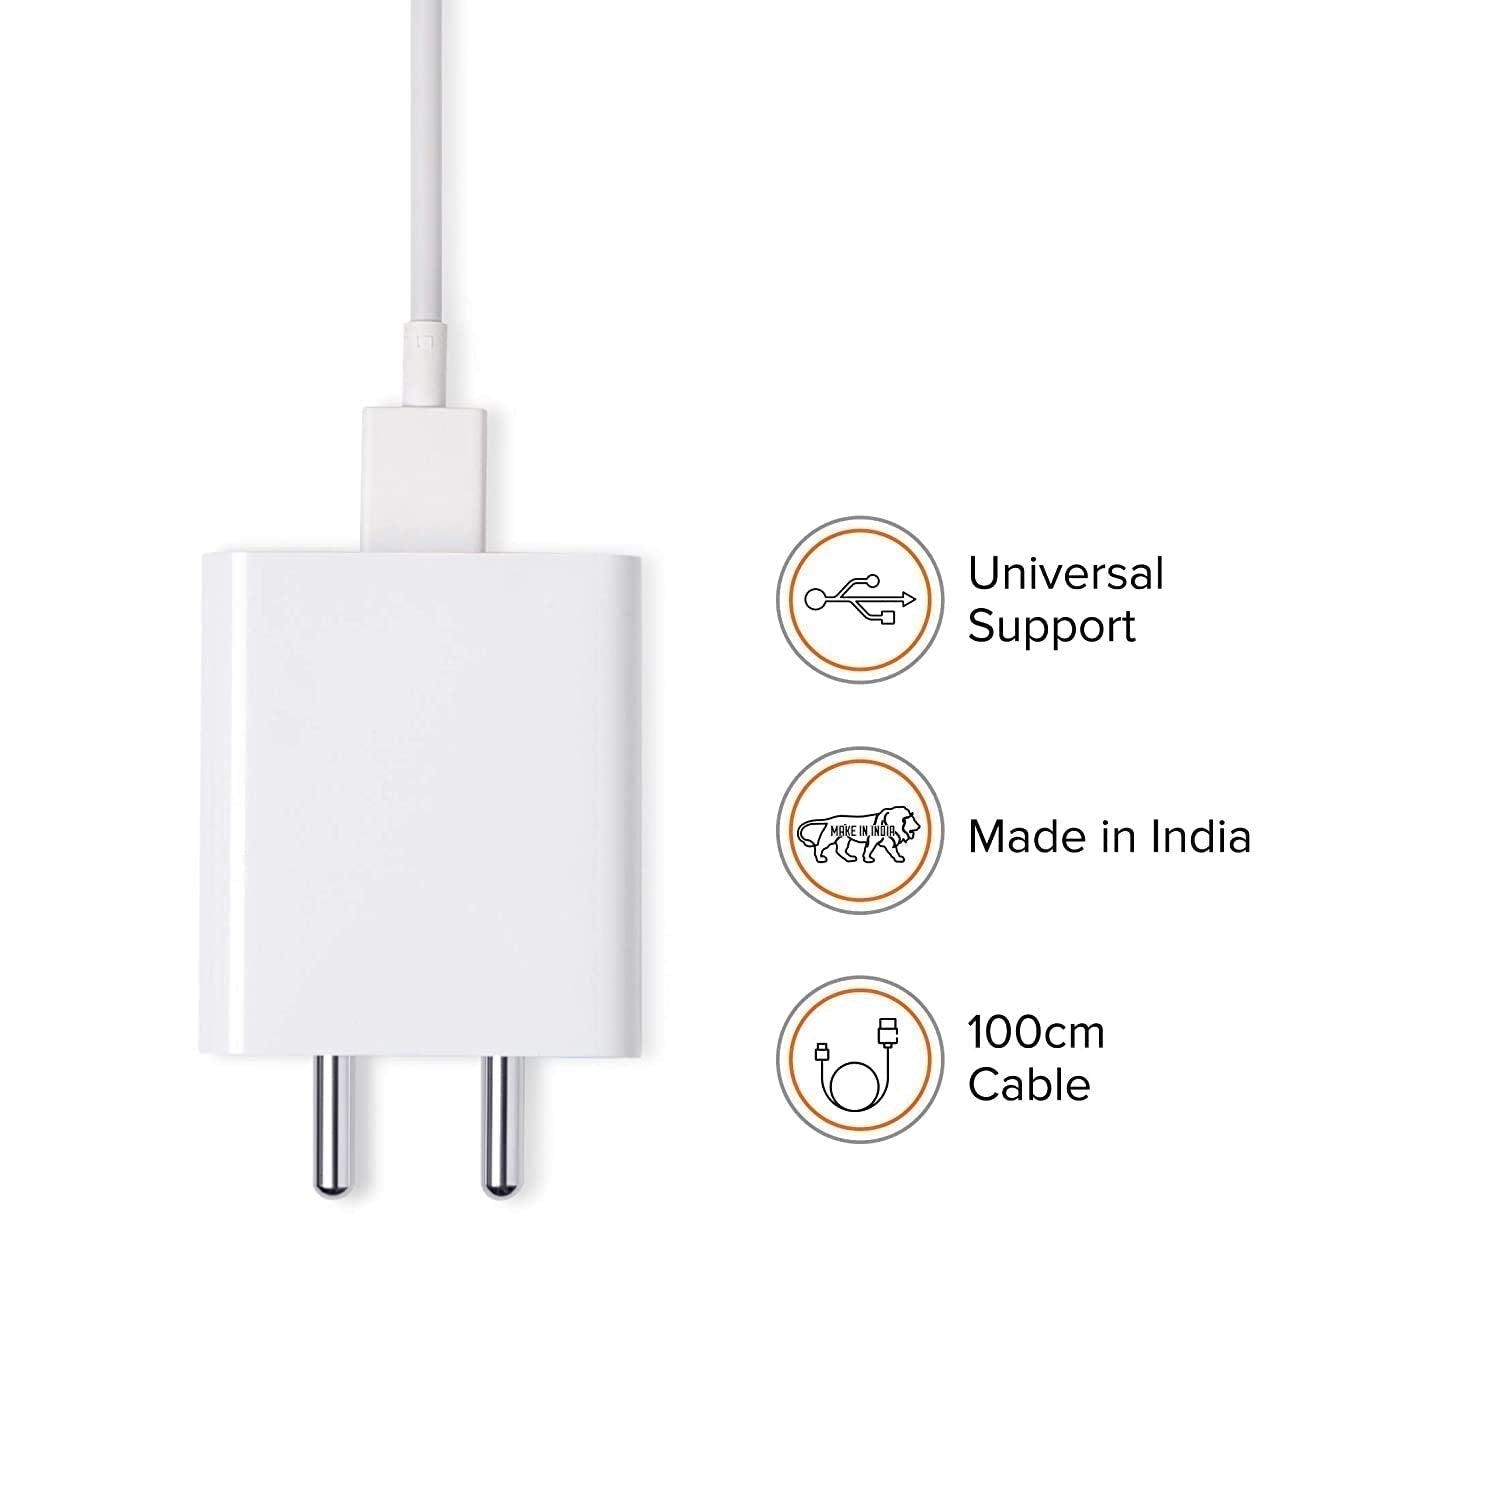 Poco X6 Neo Superfast 33W Support SonicCharge 2.0 Charger With Type-C Cable